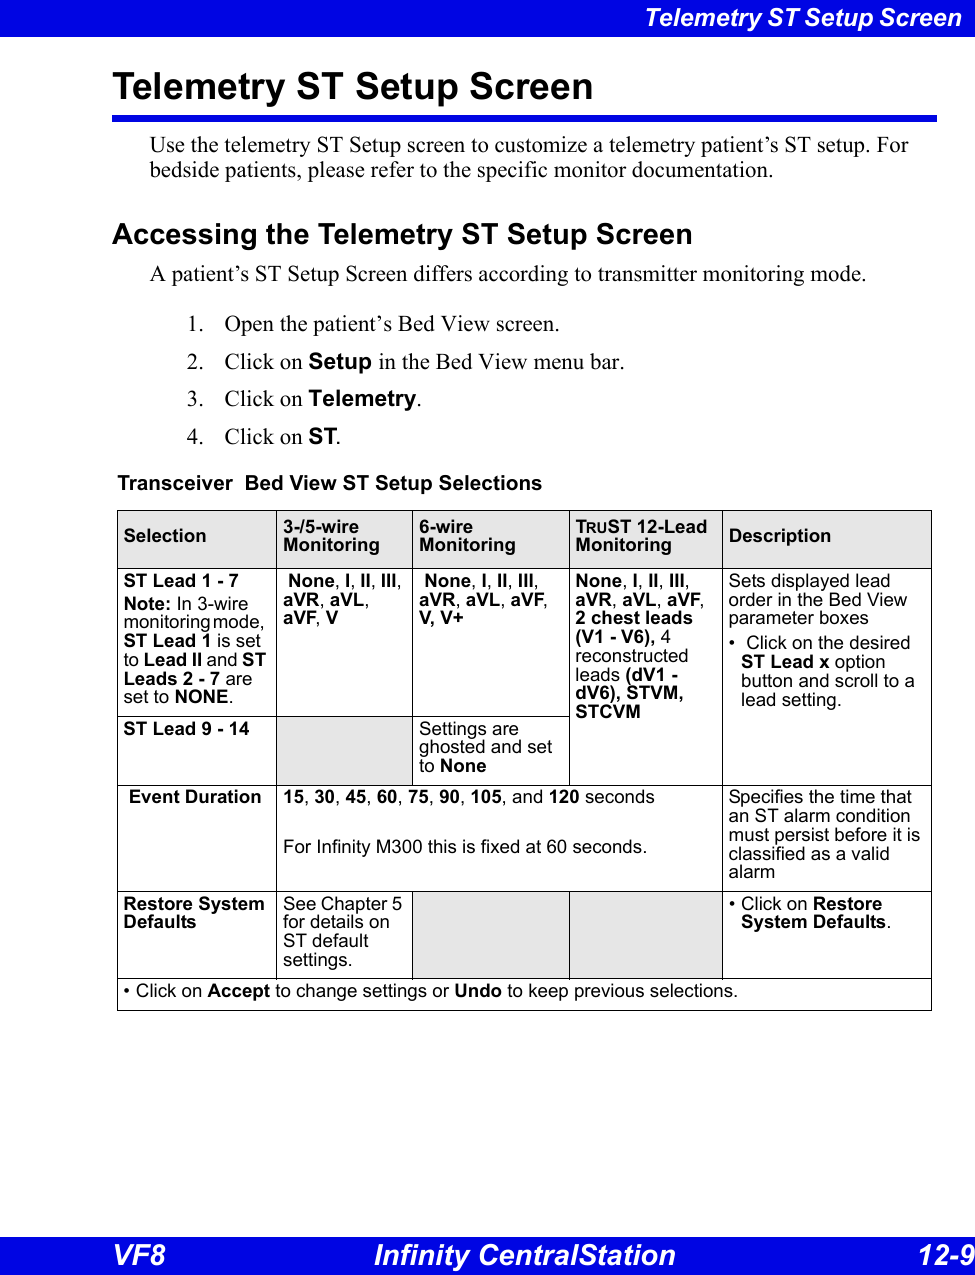 Telemetry ST Setup Screen VF8 Infinity CentralStation 12-9 Telemetry ST Setup ScreenUse the telemetry ST Setup screen to customize a telemetry patient’s ST setup. For bedside patients, please refer to the specific monitor documentation.Accessing the Telemetry ST Setup ScreenA patient’s ST Setup Screen differs according to transmitter monitoring mode. 1. Open the patient’s Bed View screen.2. Click on Setup in the Bed View menu bar. 3. Click on Telemetry. 4. Click on ST.Transceiver  Bed View ST Setup SelectionsSelection 3-/5-wireMonitoring6-wireMonitoringTRUST 12-Lead Monitoring DescriptionST Lead 1 - 7Note: In 3-wire monitoring mode,   ST Lead 1 is set to Lead II and ST Leads 2 - 7 are set to NONE. None, I, II, III, aVR, aVL, aVF, V None, I, II, III, aVR, aVL, aVF, V, V+None, I, II, III, aVR, aVL, aVF, 2 chest leads (V1 - V6), 4 reconstructed leads (dV1 - dV6), STVM, STCVMSets displayed lead order in the Bed View parameter boxes •  Click on the desired ST Lead x option button and scroll to a lead setting.ST Lead 9 - 14 Settings are ghosted and set to None Event Duration 15, 30, 45, 60, 75, 90, 105, and 120 secondsFor Infinity M300 this is fixed at 60 seconds.Specifies the time that an ST alarm condition must persist before it is classified as a valid alarmRestore System DefaultsSee Chapter 5 for details on ST default settings.• Click on Restore System Defaults.• Click on Accept to change settings or Undo to keep previous selections. 